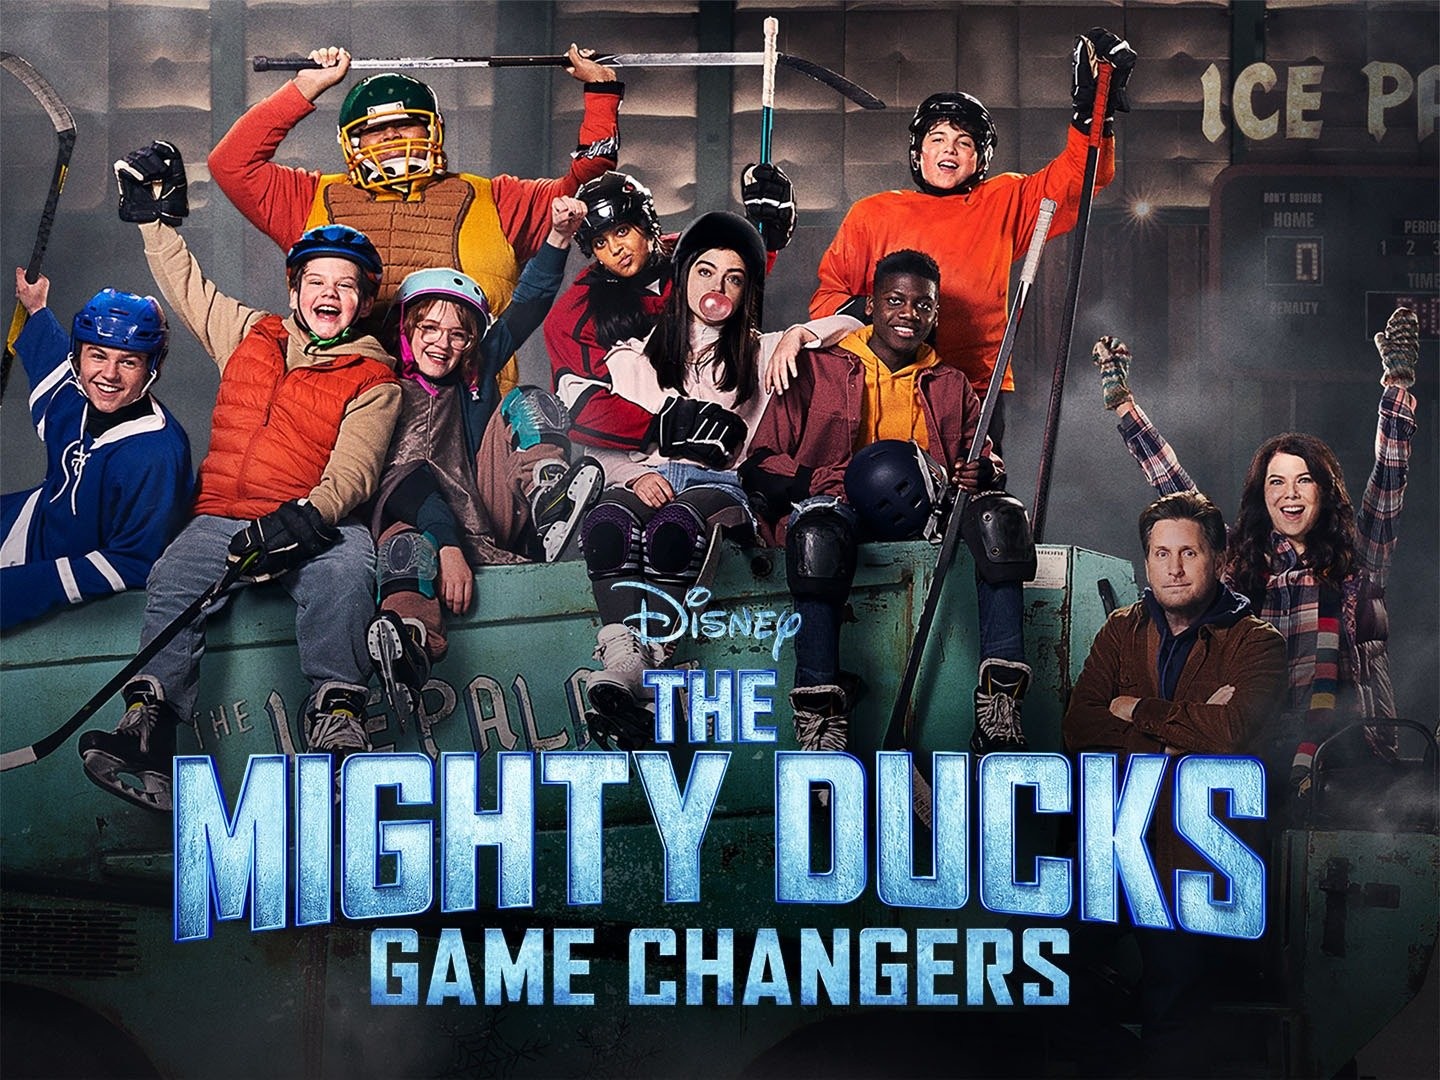 The Mighty Ducks: Game Changers fantasy draft, plus a review of